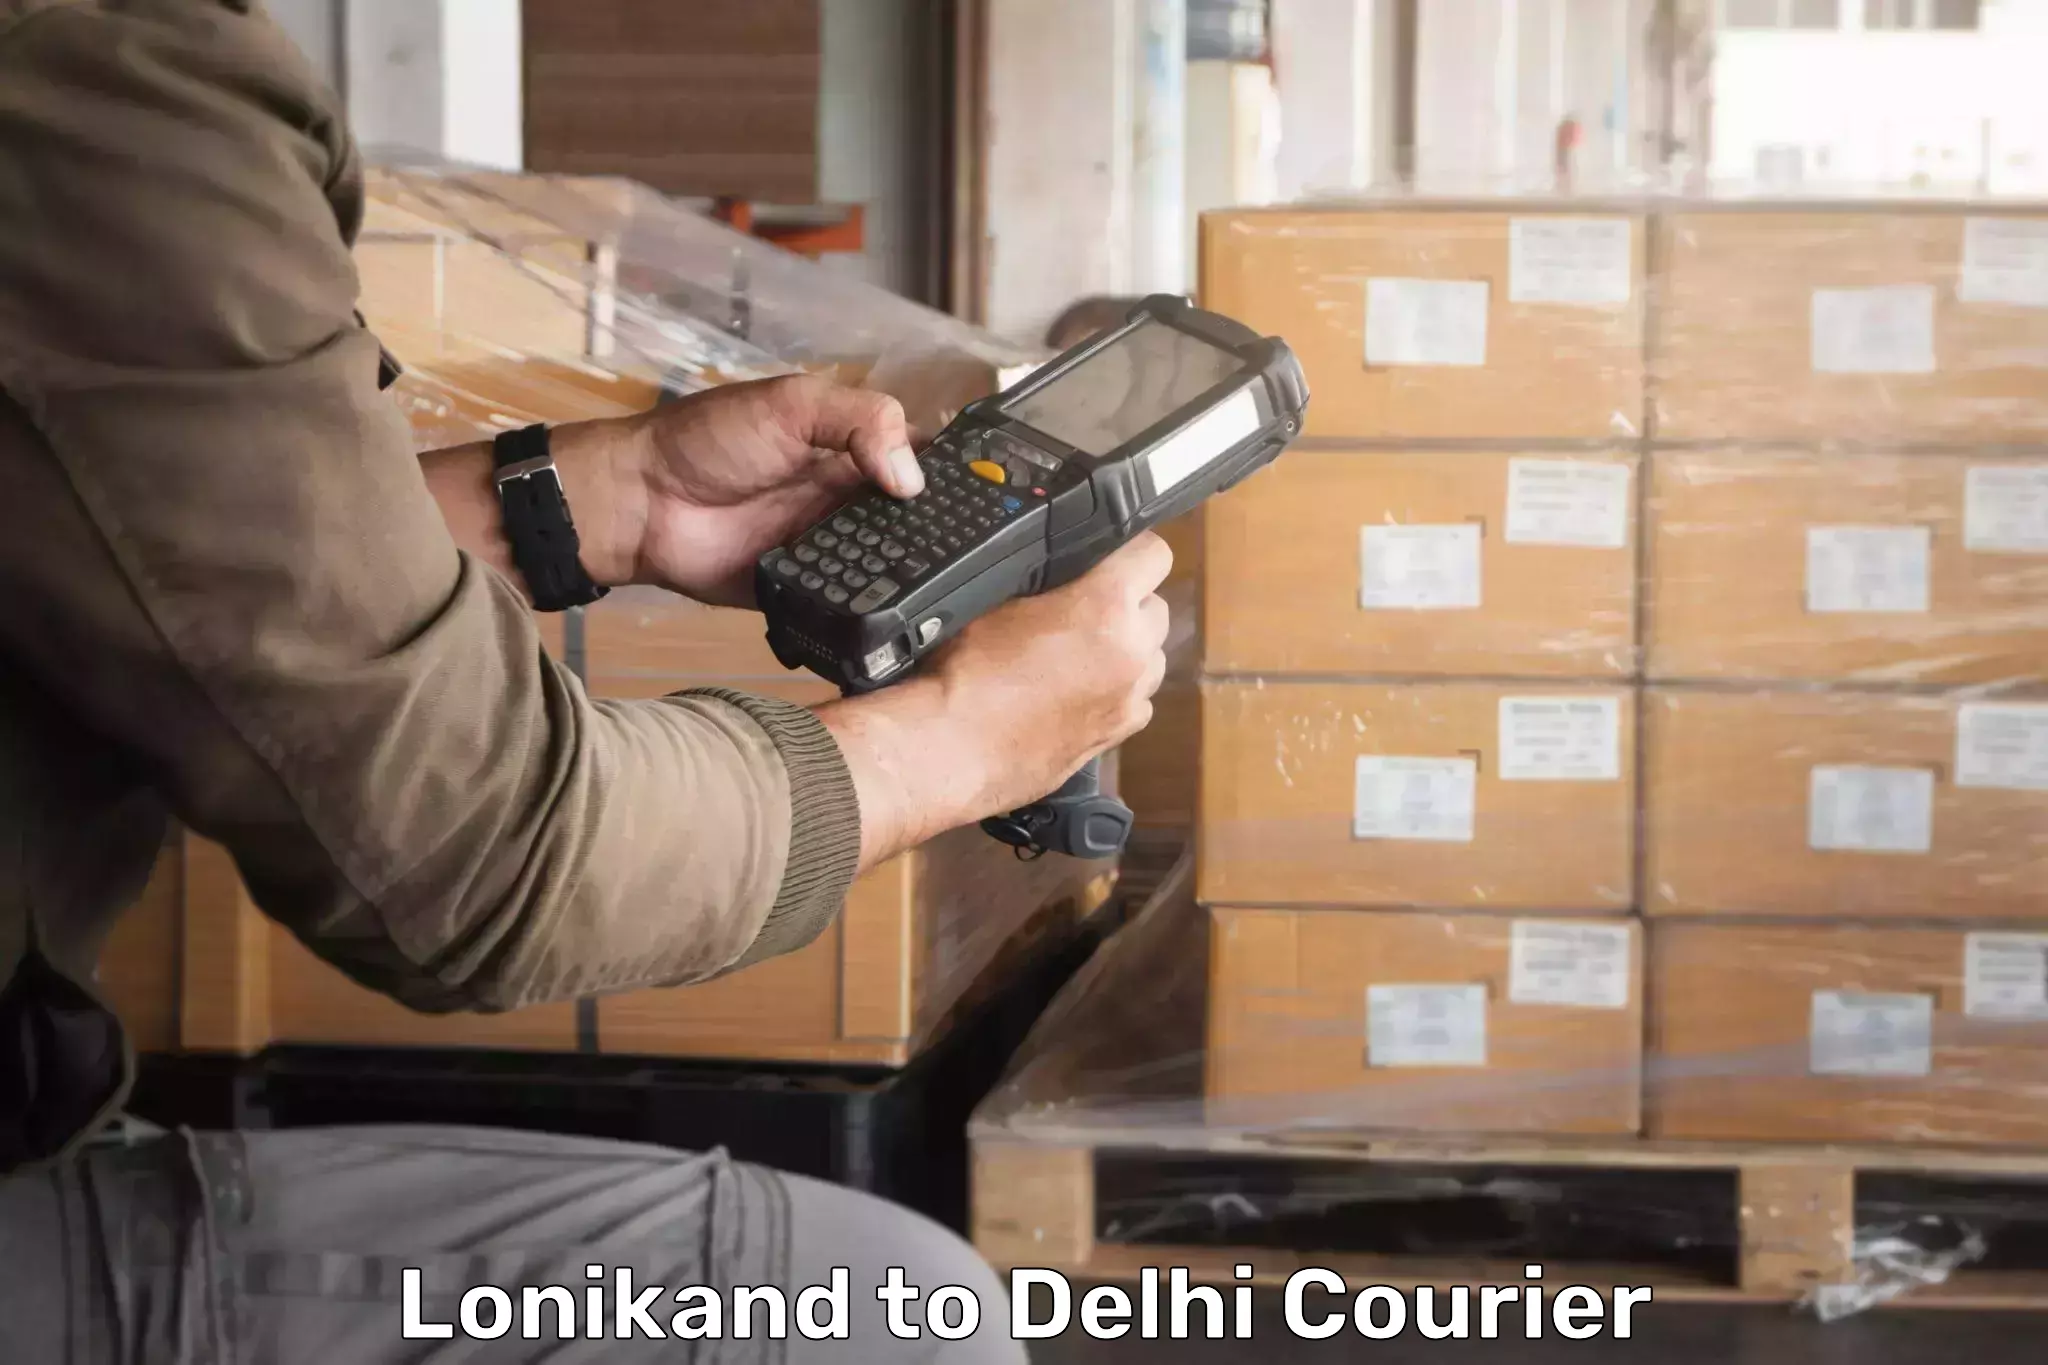 On-call courier service Lonikand to East Delhi